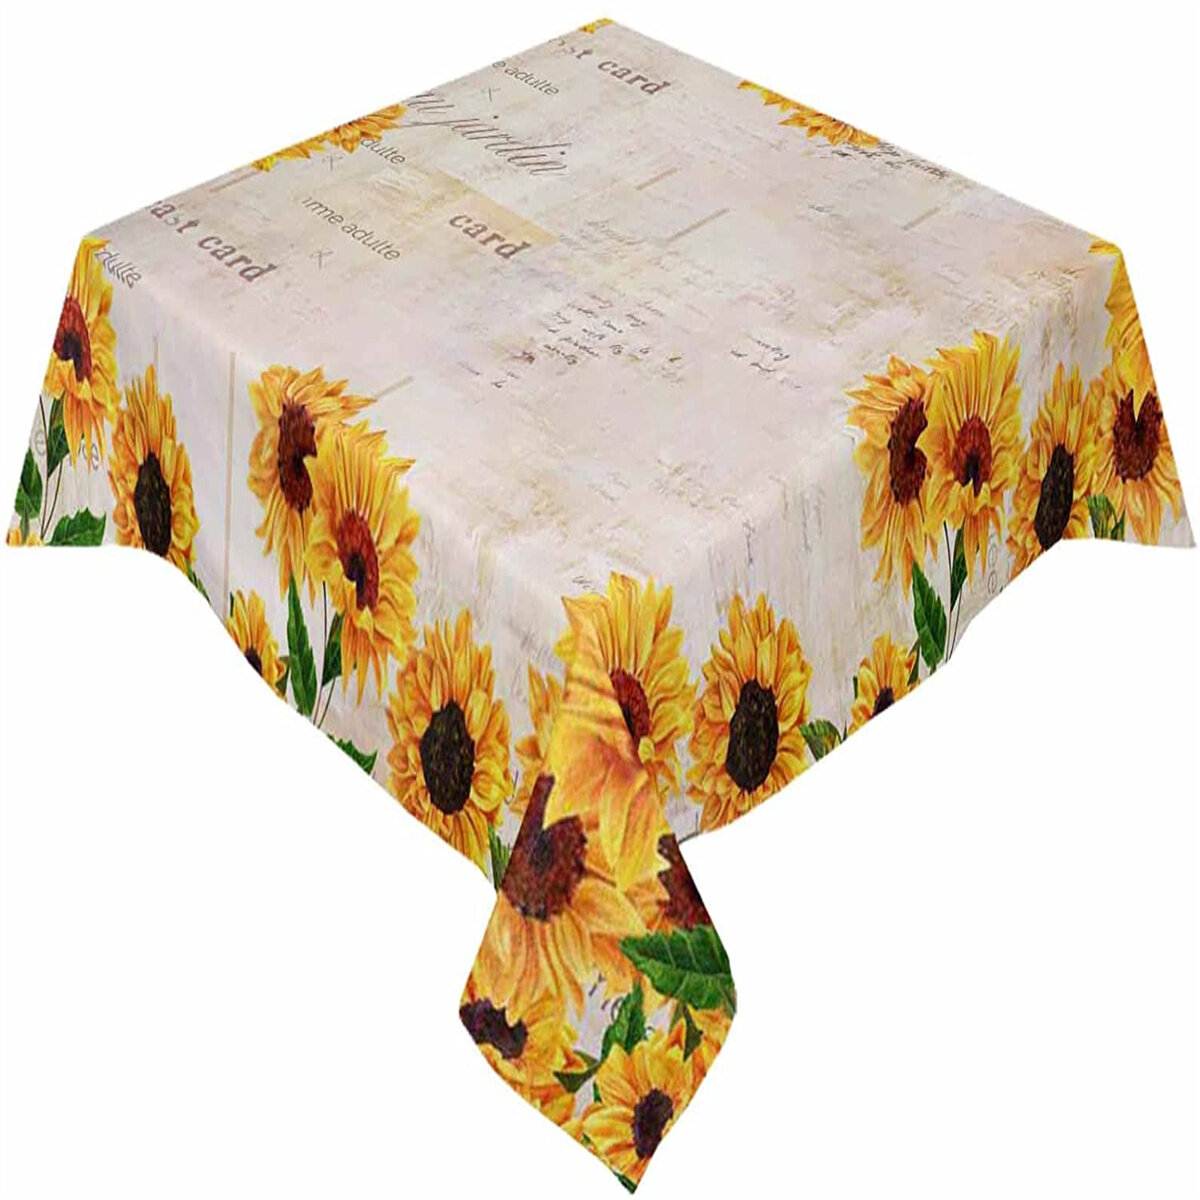 Embroidered Tablecloth Sunflower Lace Table Runner Cover Mat Dining Table Decor